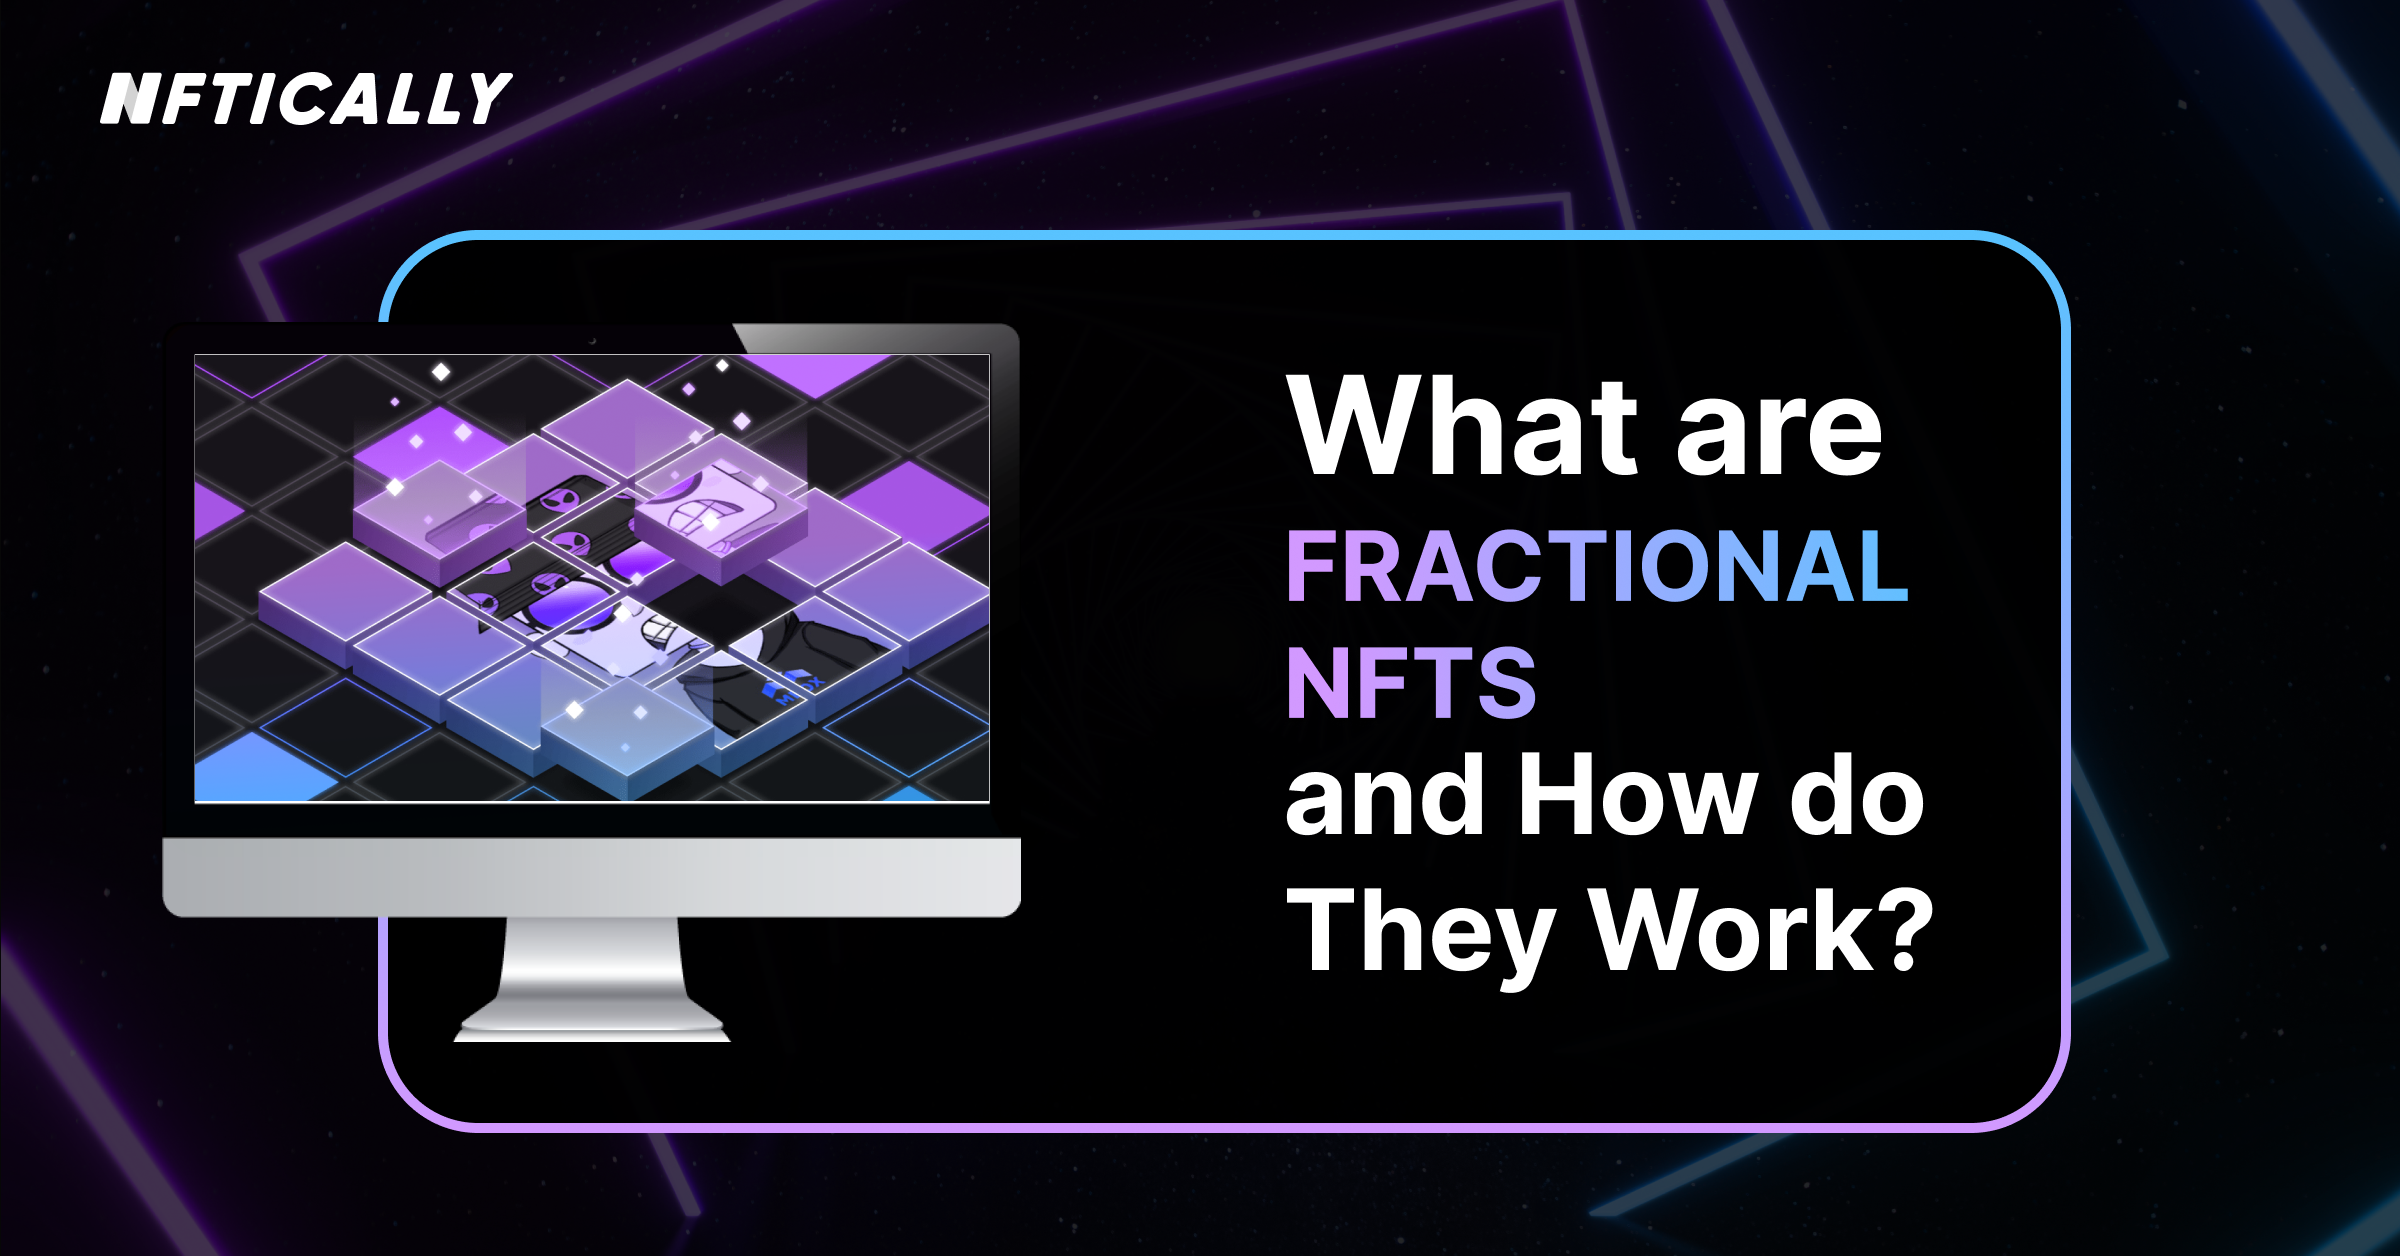 What is Fractional NFT?